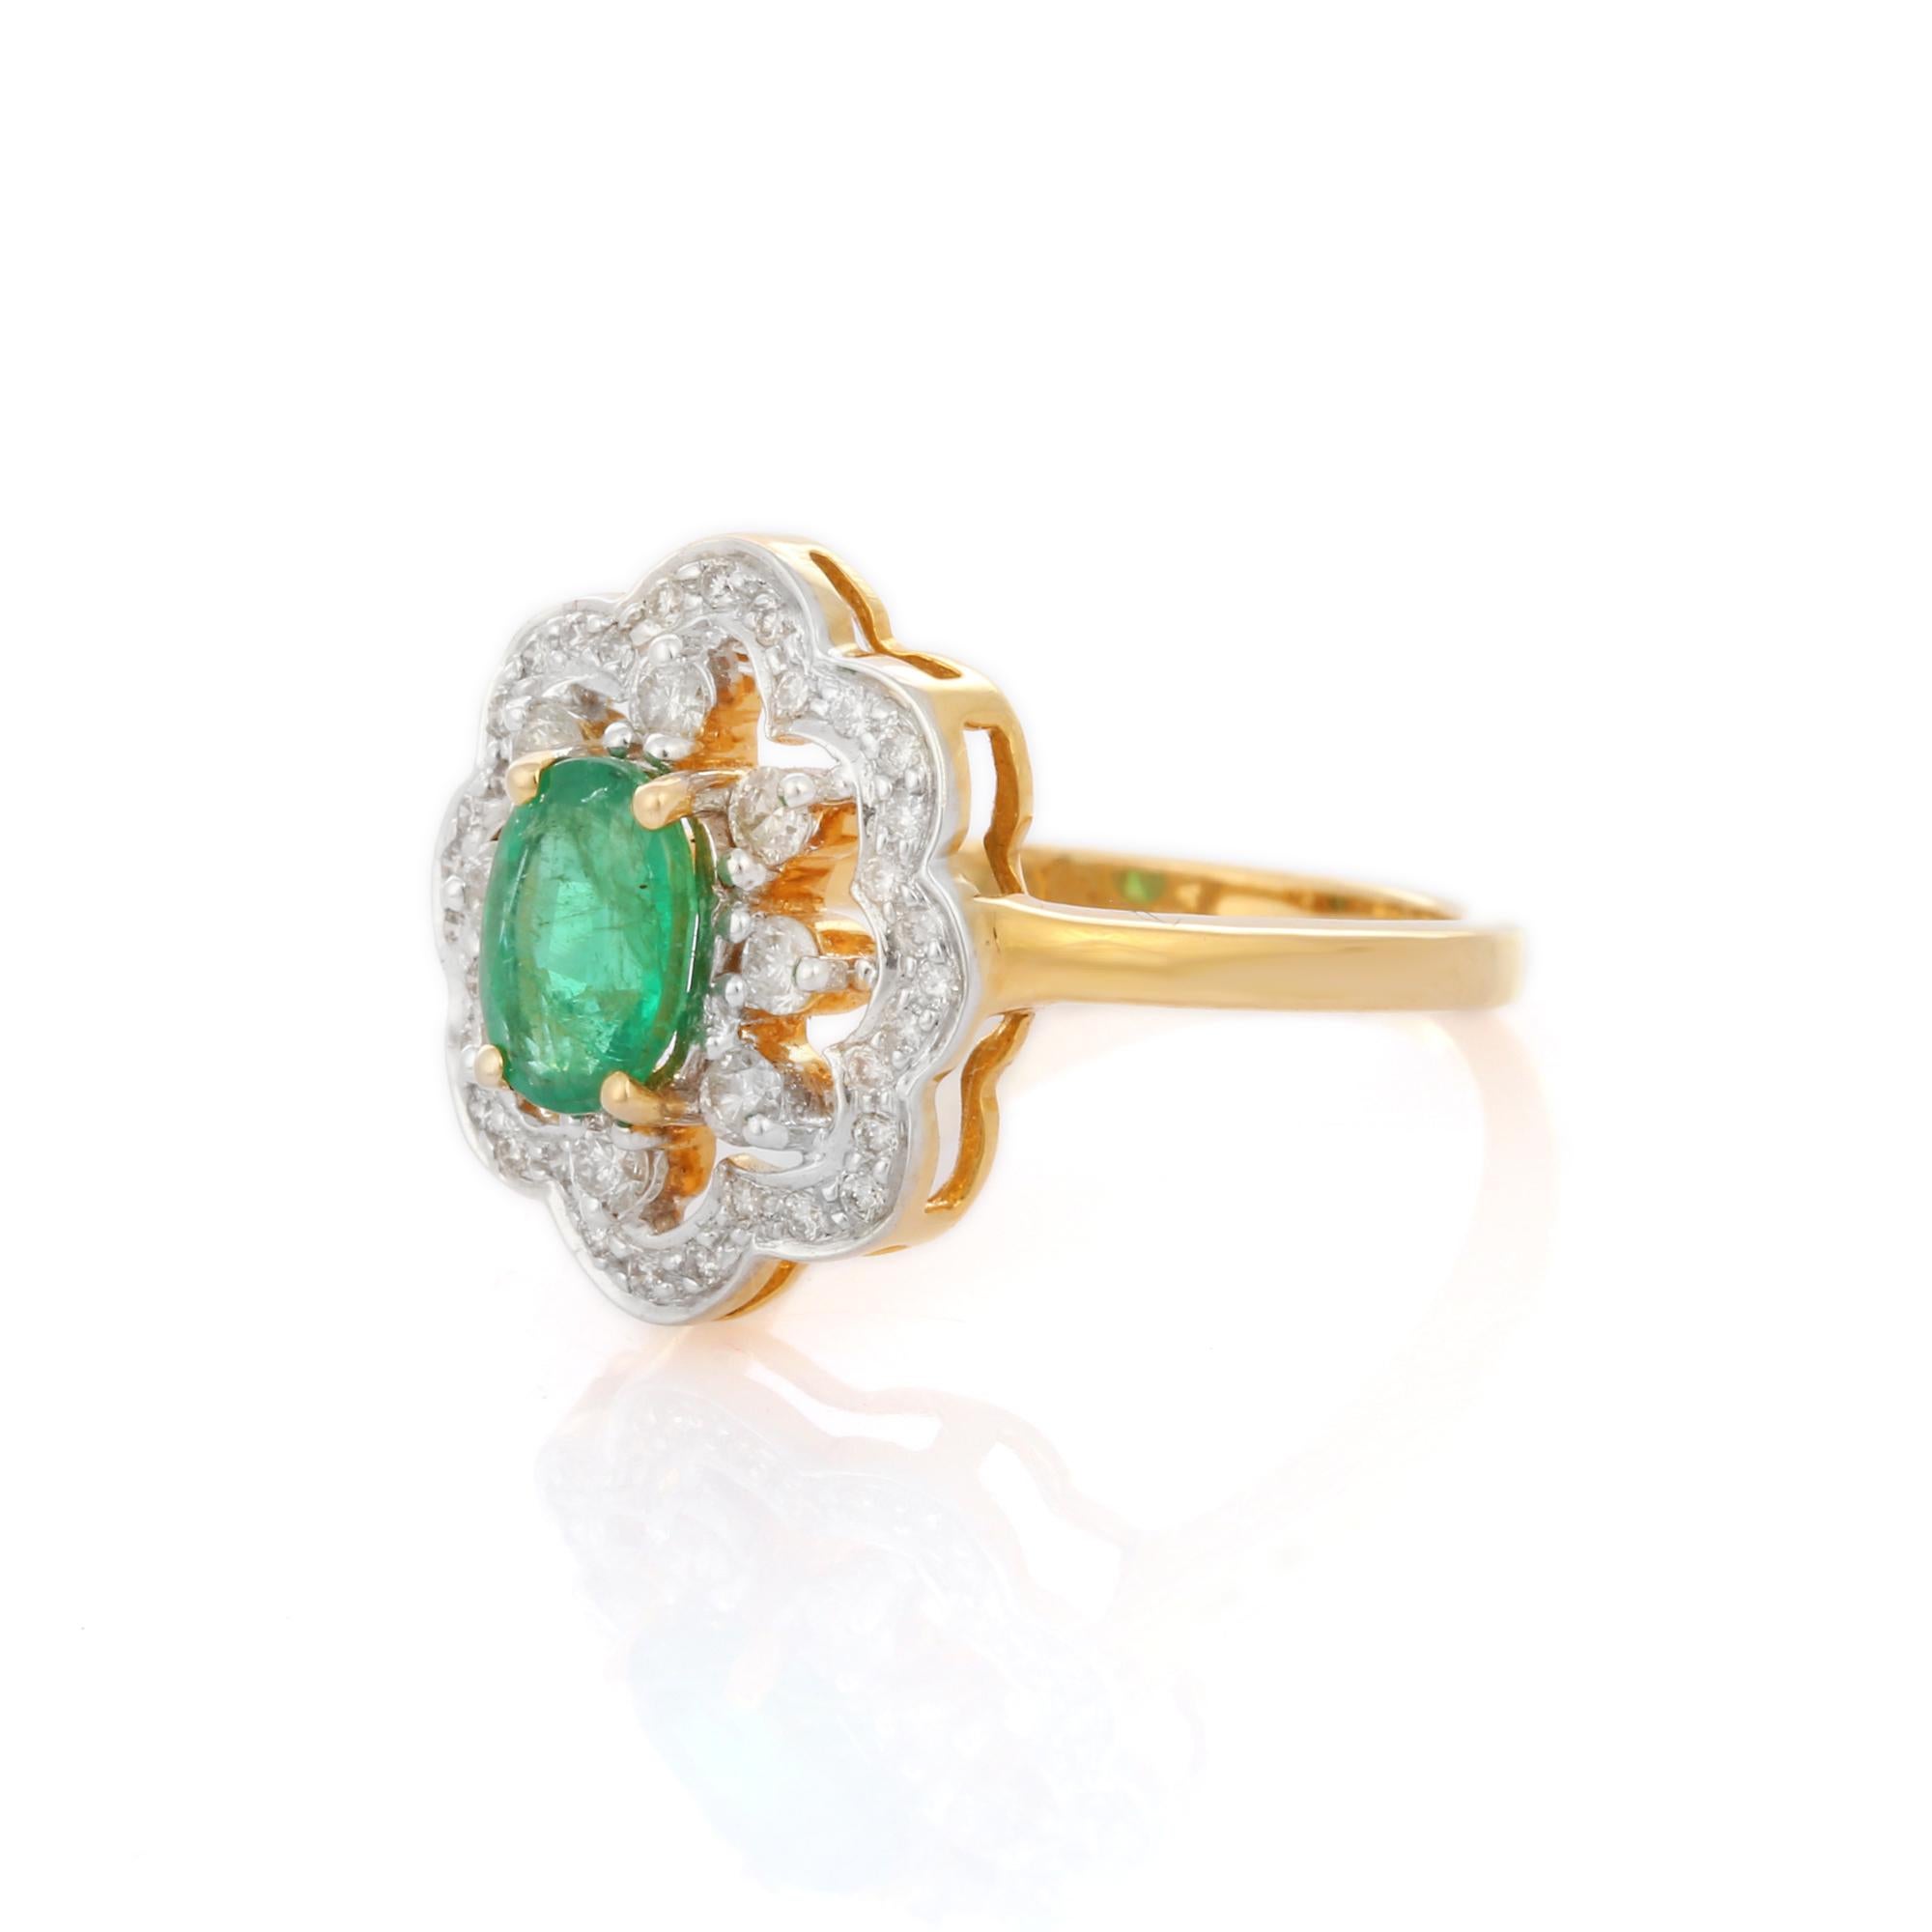 For Sale:  Big Floral Oval Cut Emerald and Diamond Cocktail Ring in 18K Yellow Gold 4